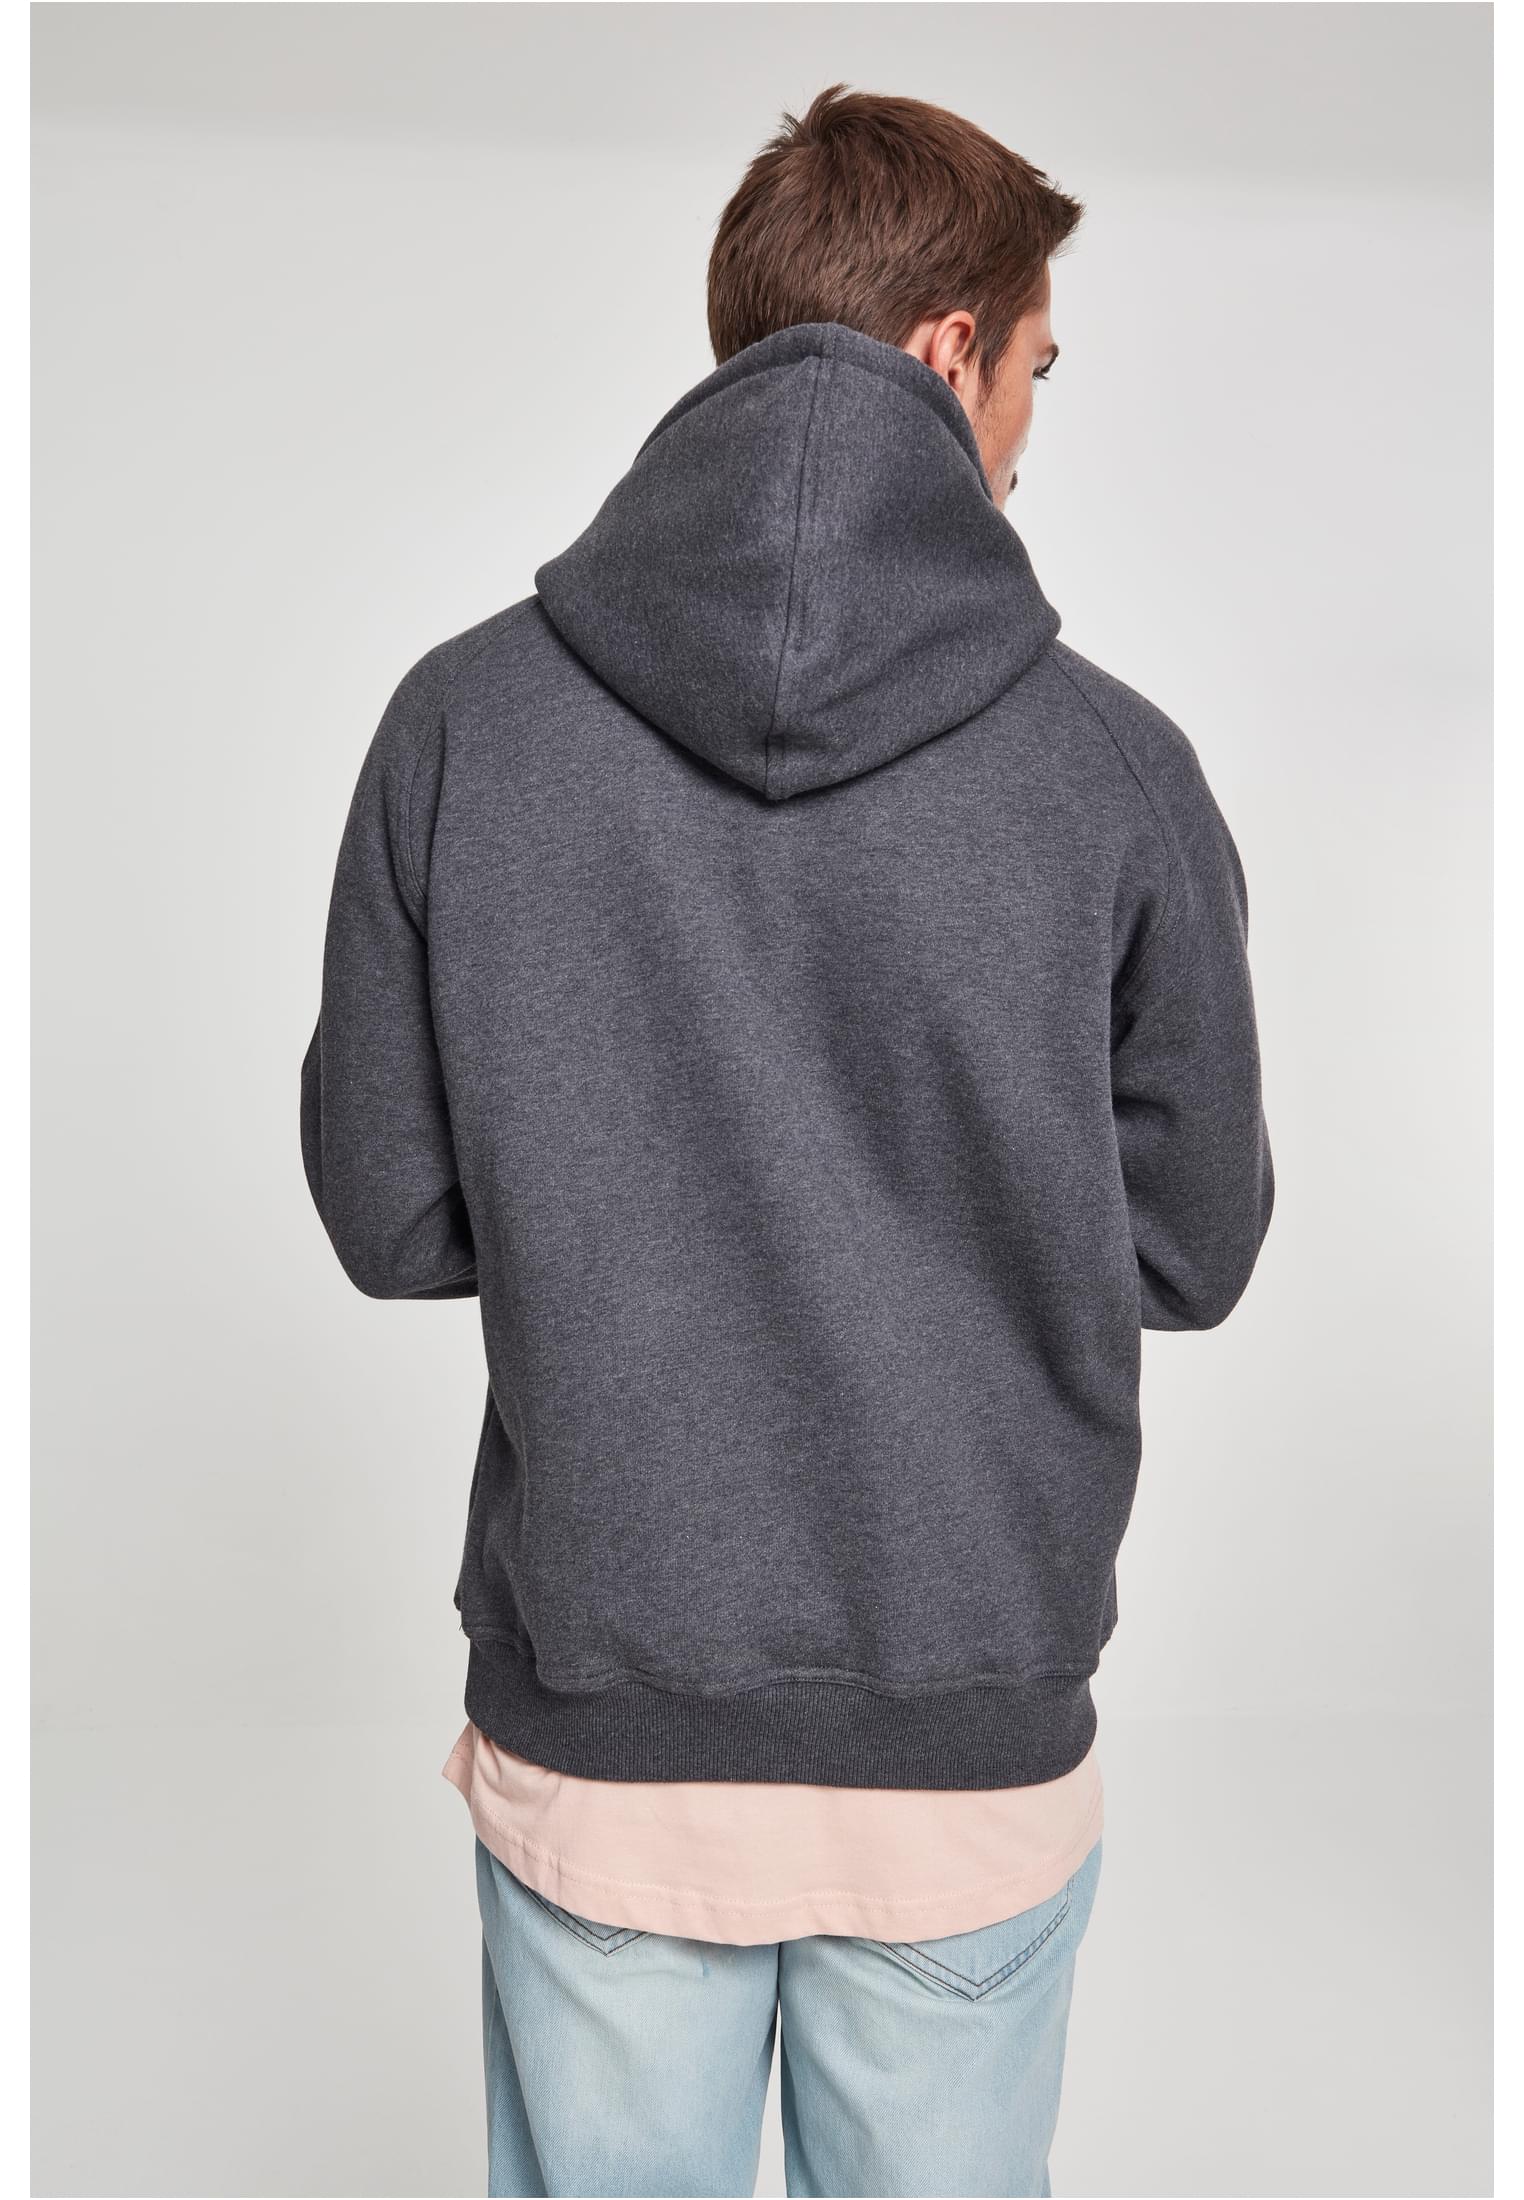 Plus Size Blank Hoody in Farbe charcoal